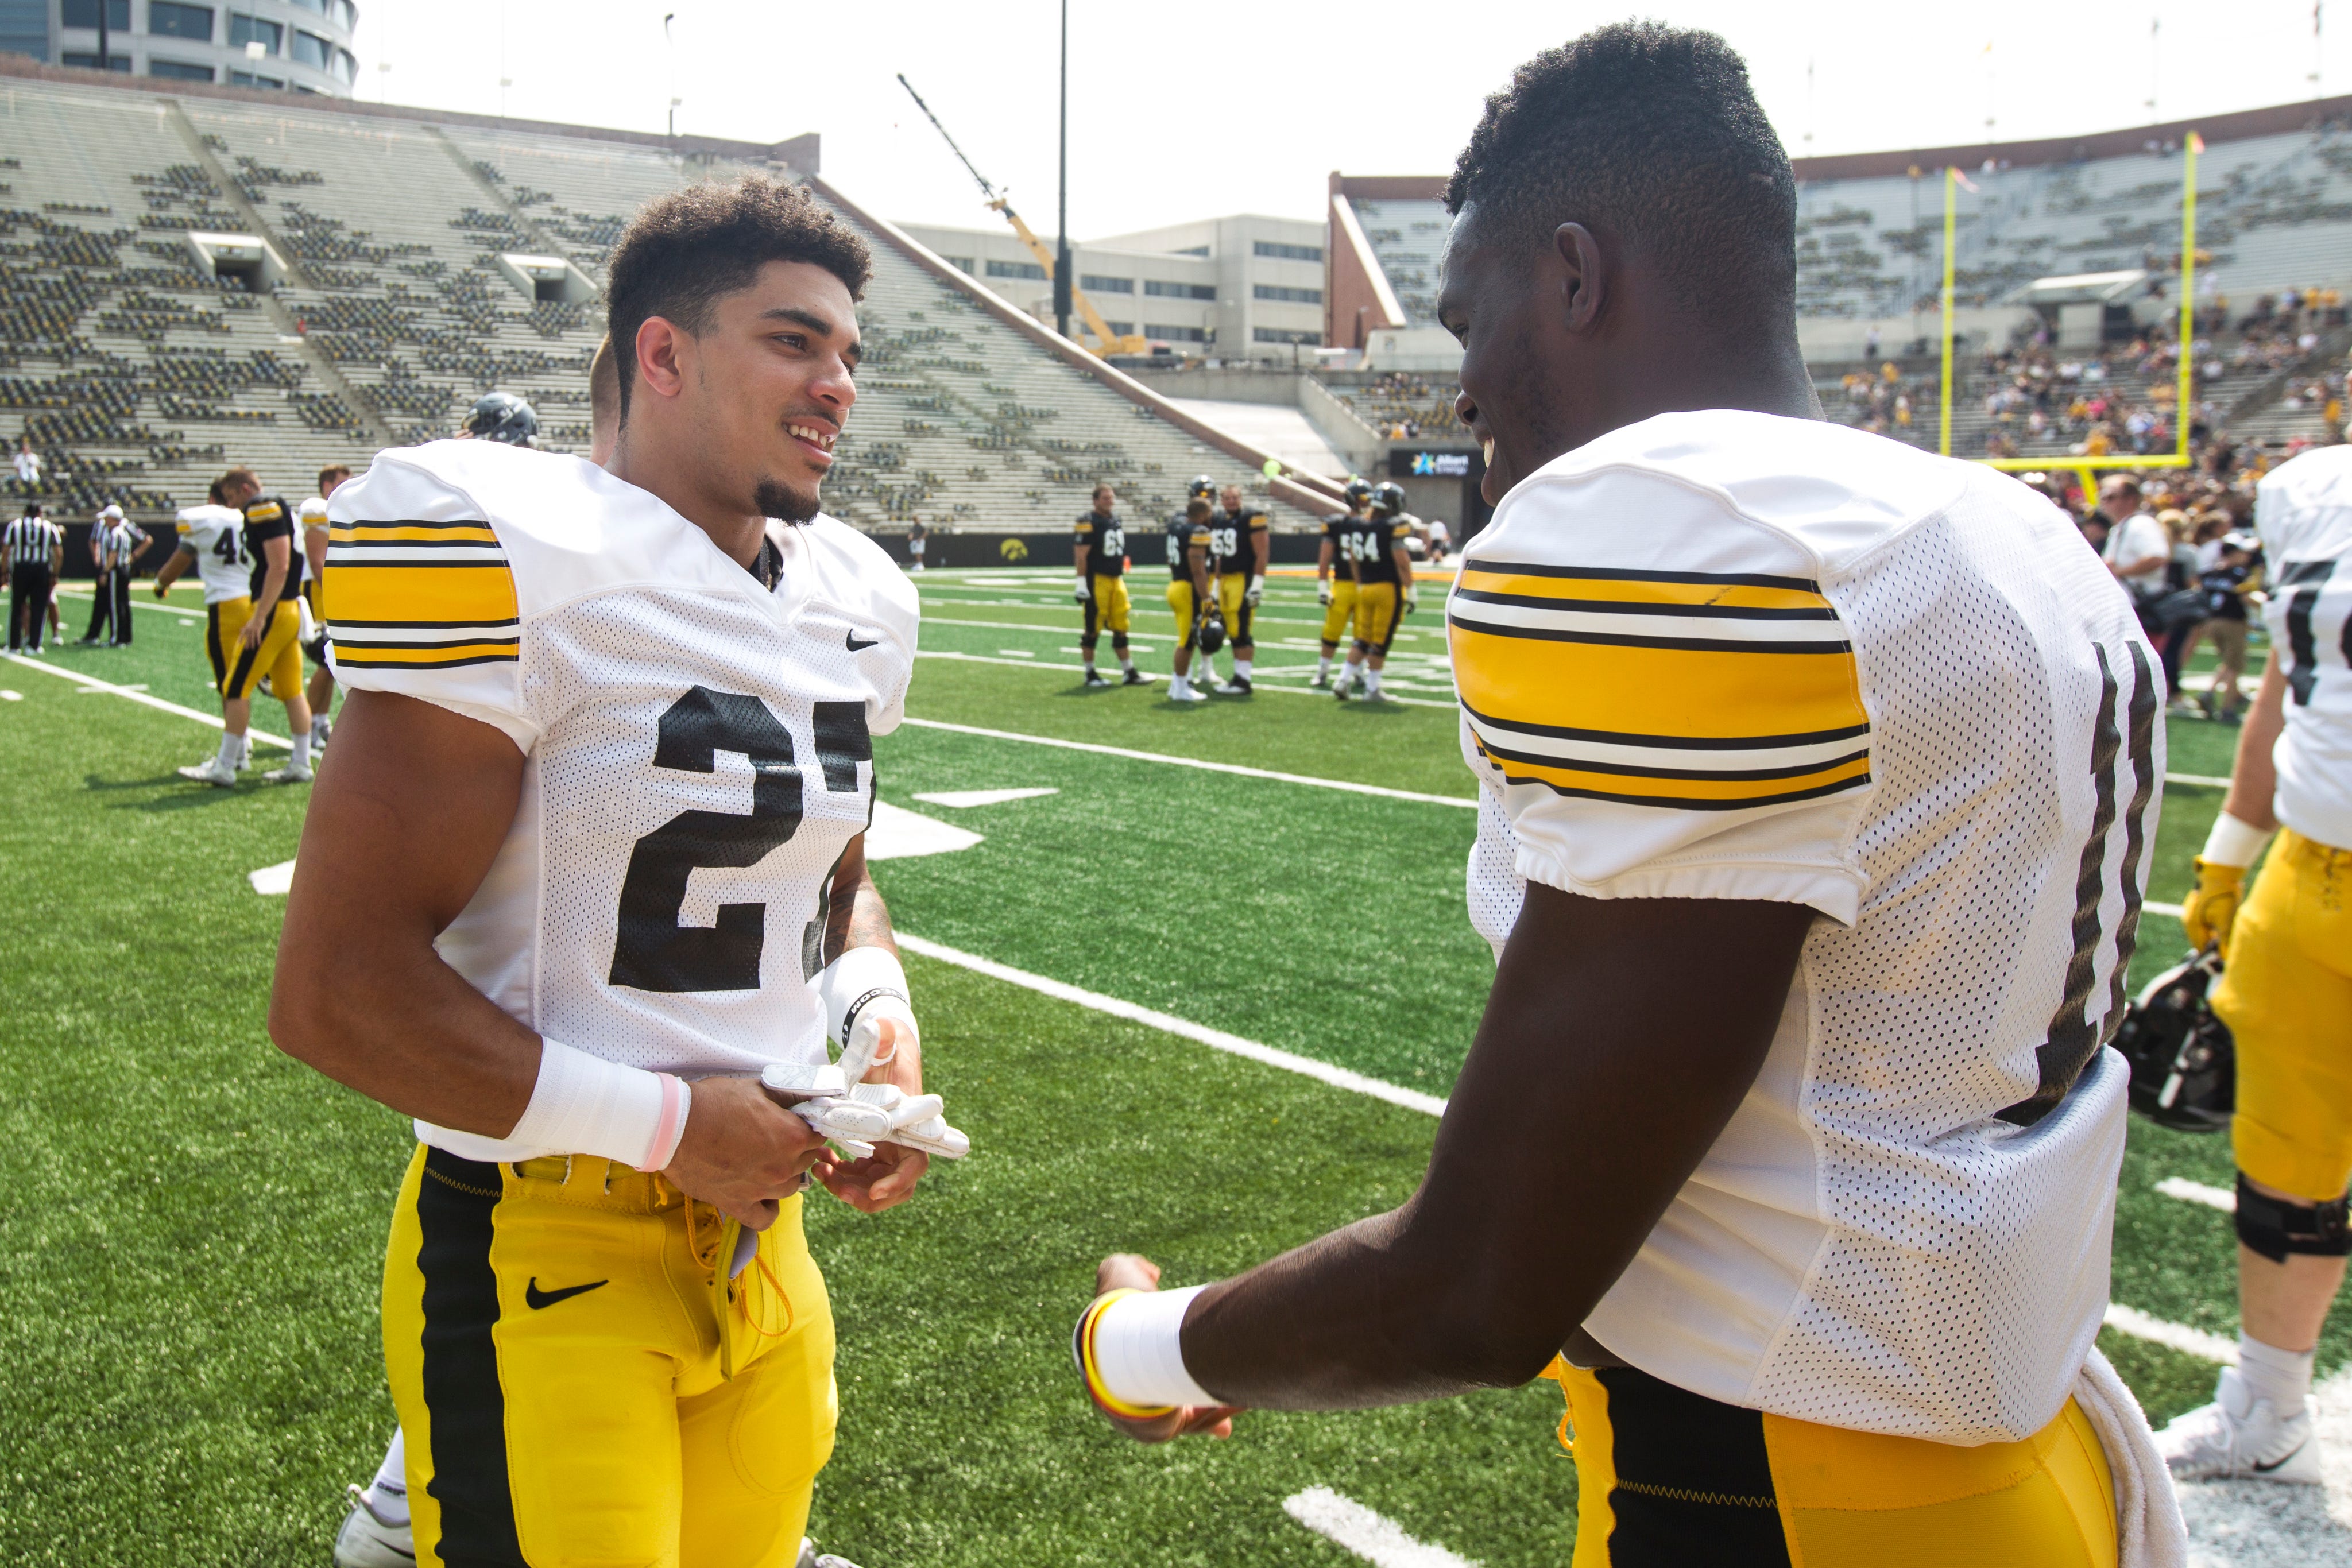 Iowa defensive back Amani Hooker (27) talks with teammate Michael Ojemudia (11) during a Kids Day practice on Saturday, Aug. 11, 2018, at Kinnick Stadium in Iowa City.